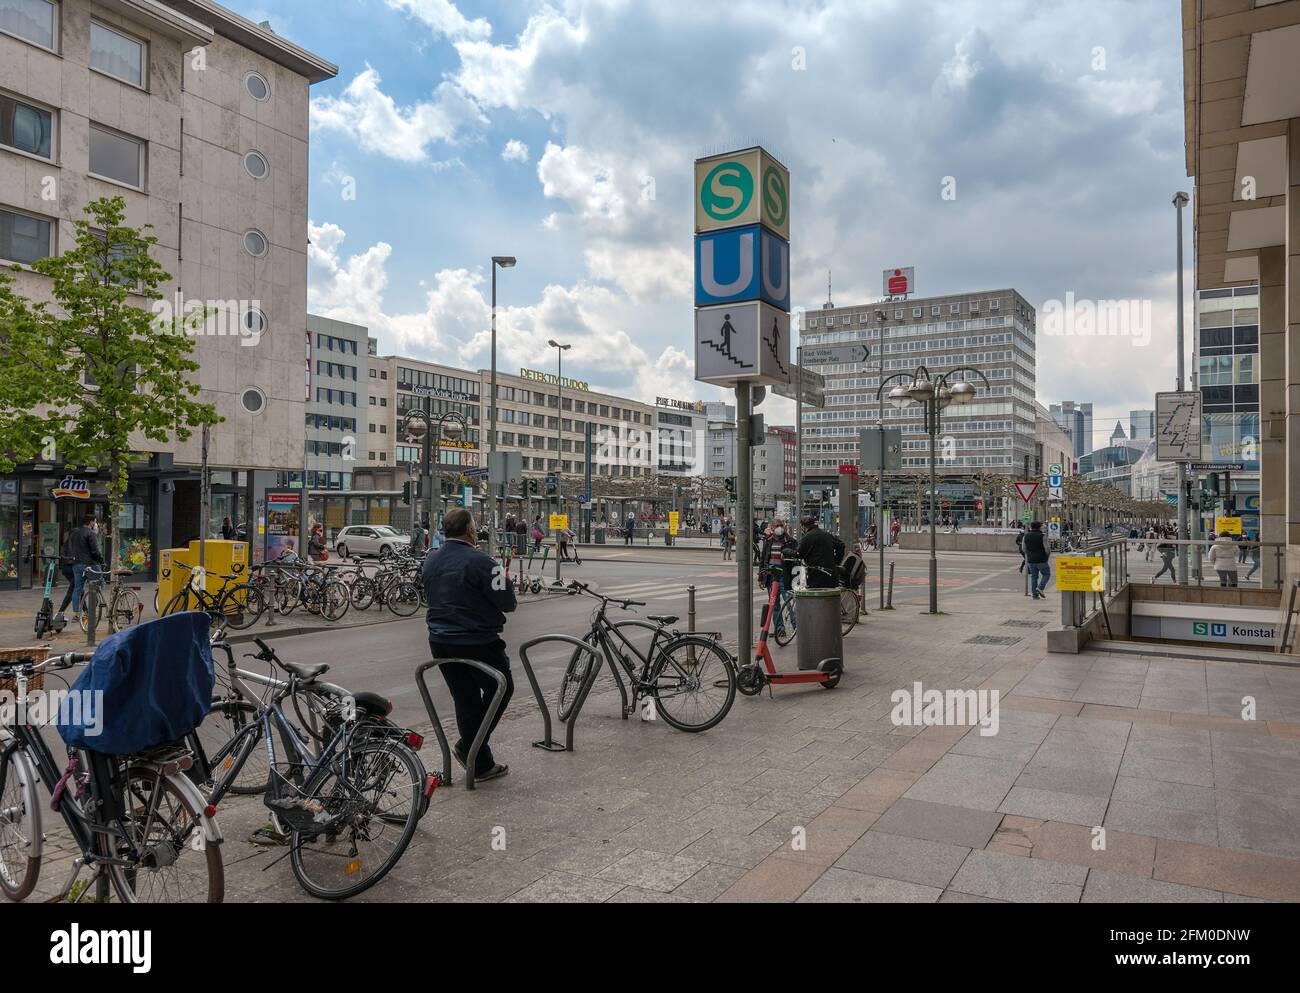 The large Konstablerwache square in downtown Frankfurt, Germany Stock Photo